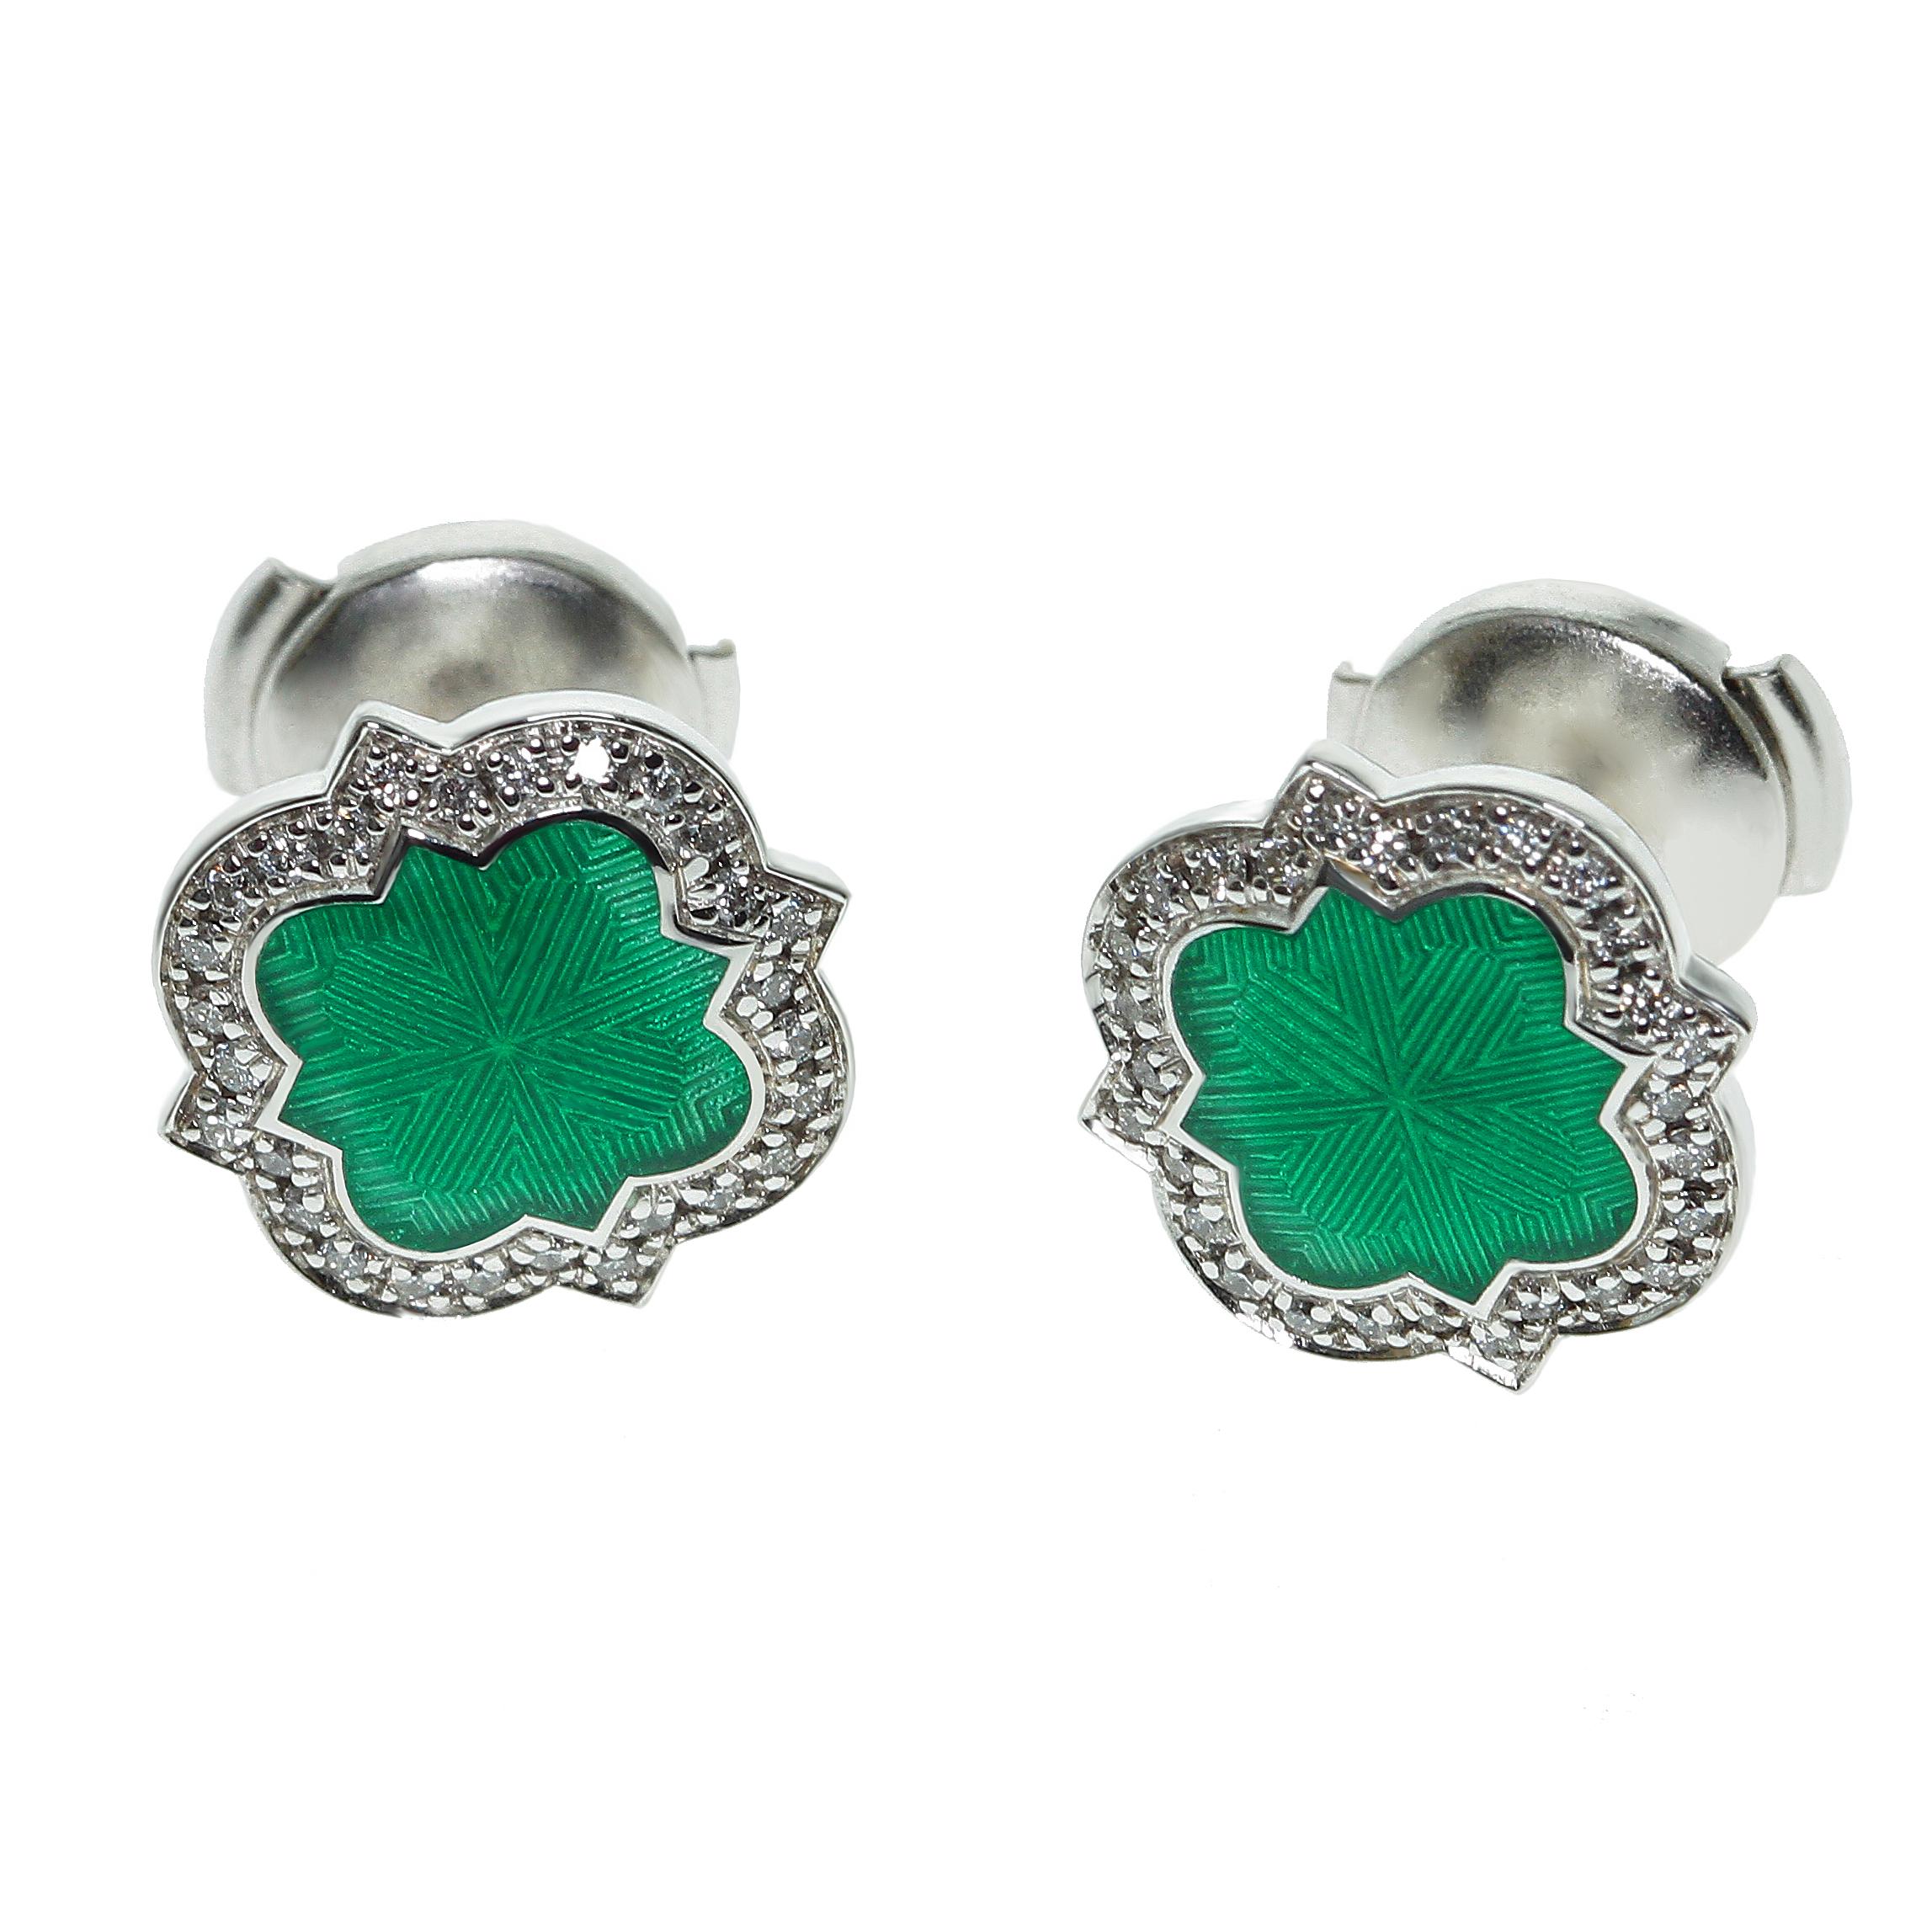 Emerald Color Enamel Diamond 18 Karat White Gold Stud Earring

This small and accurate earrings are the company to our Emerald ring LU116414762721.
Enamel is the same color tone as the central stone in Ring.

10x10x3 mm
3.94 gm